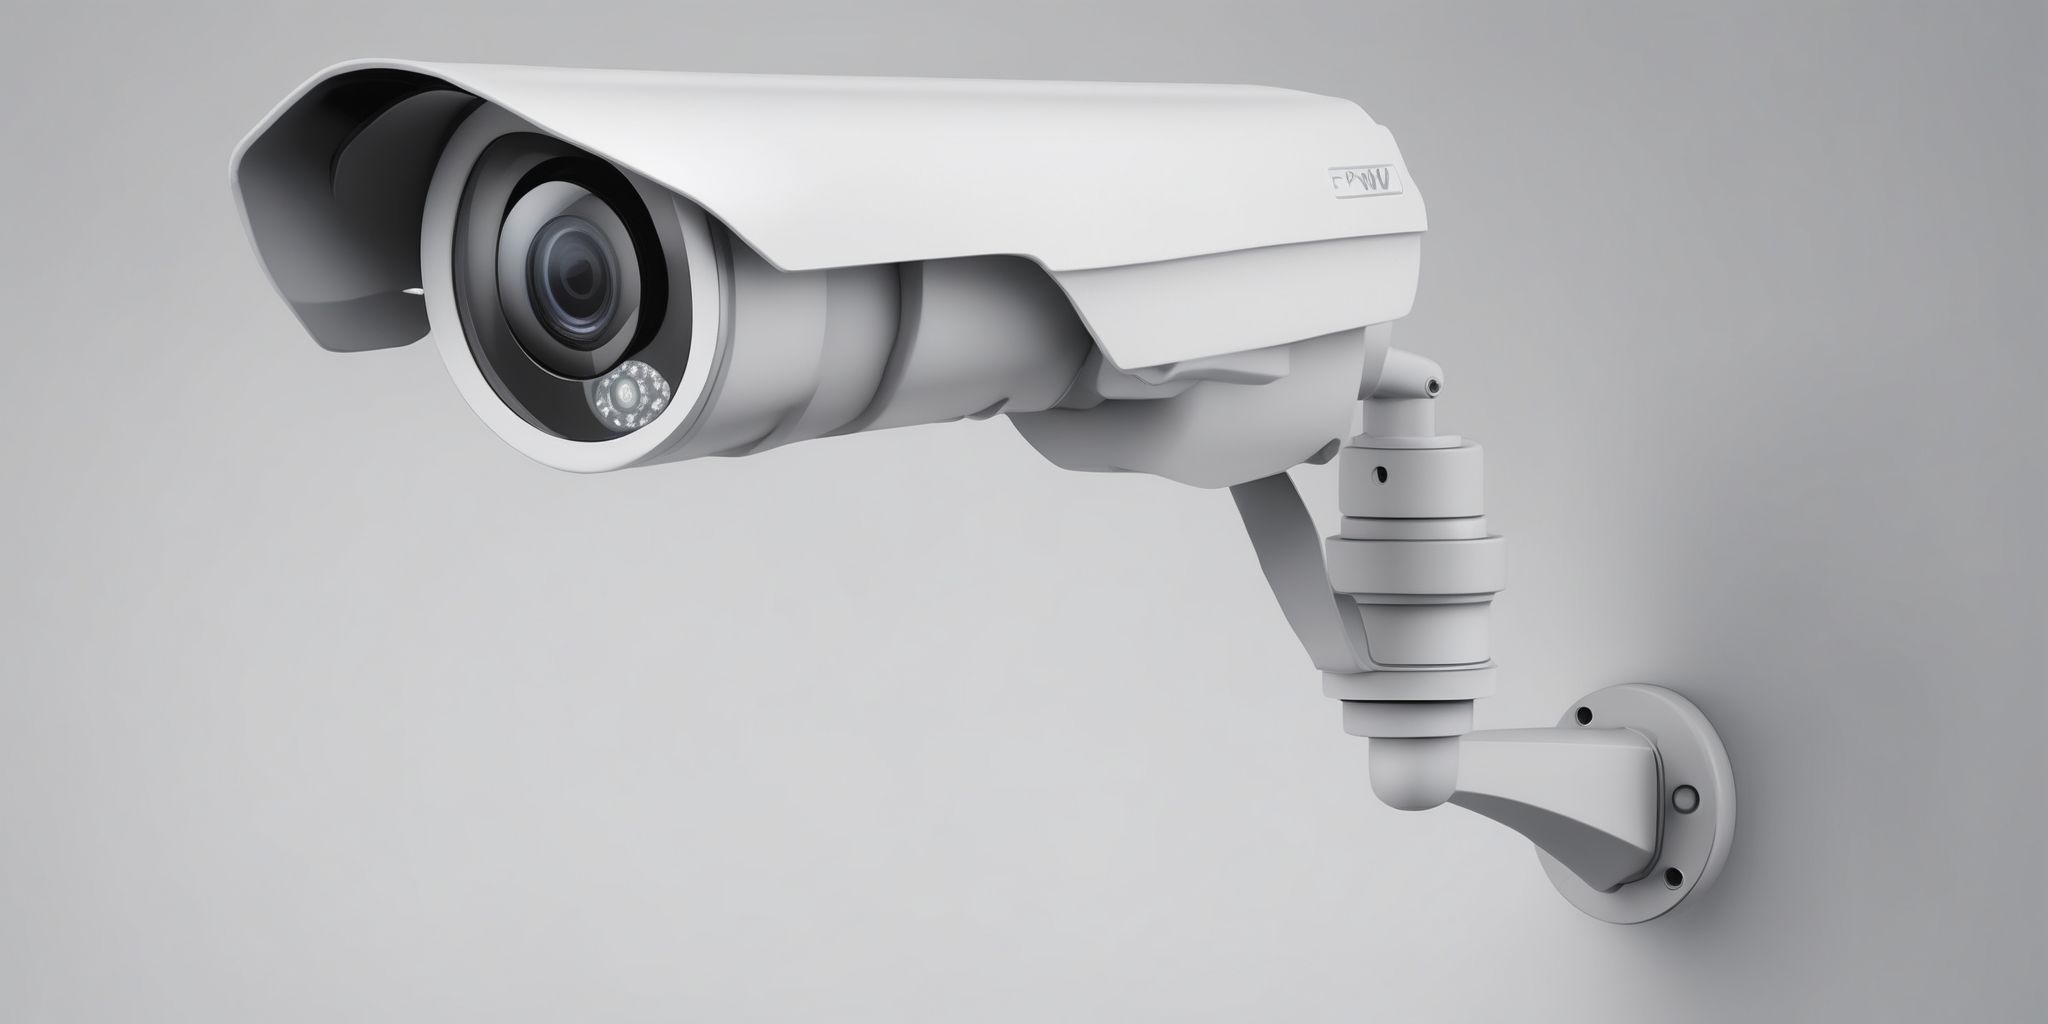 Surveillance camera  in realistic, photographic style